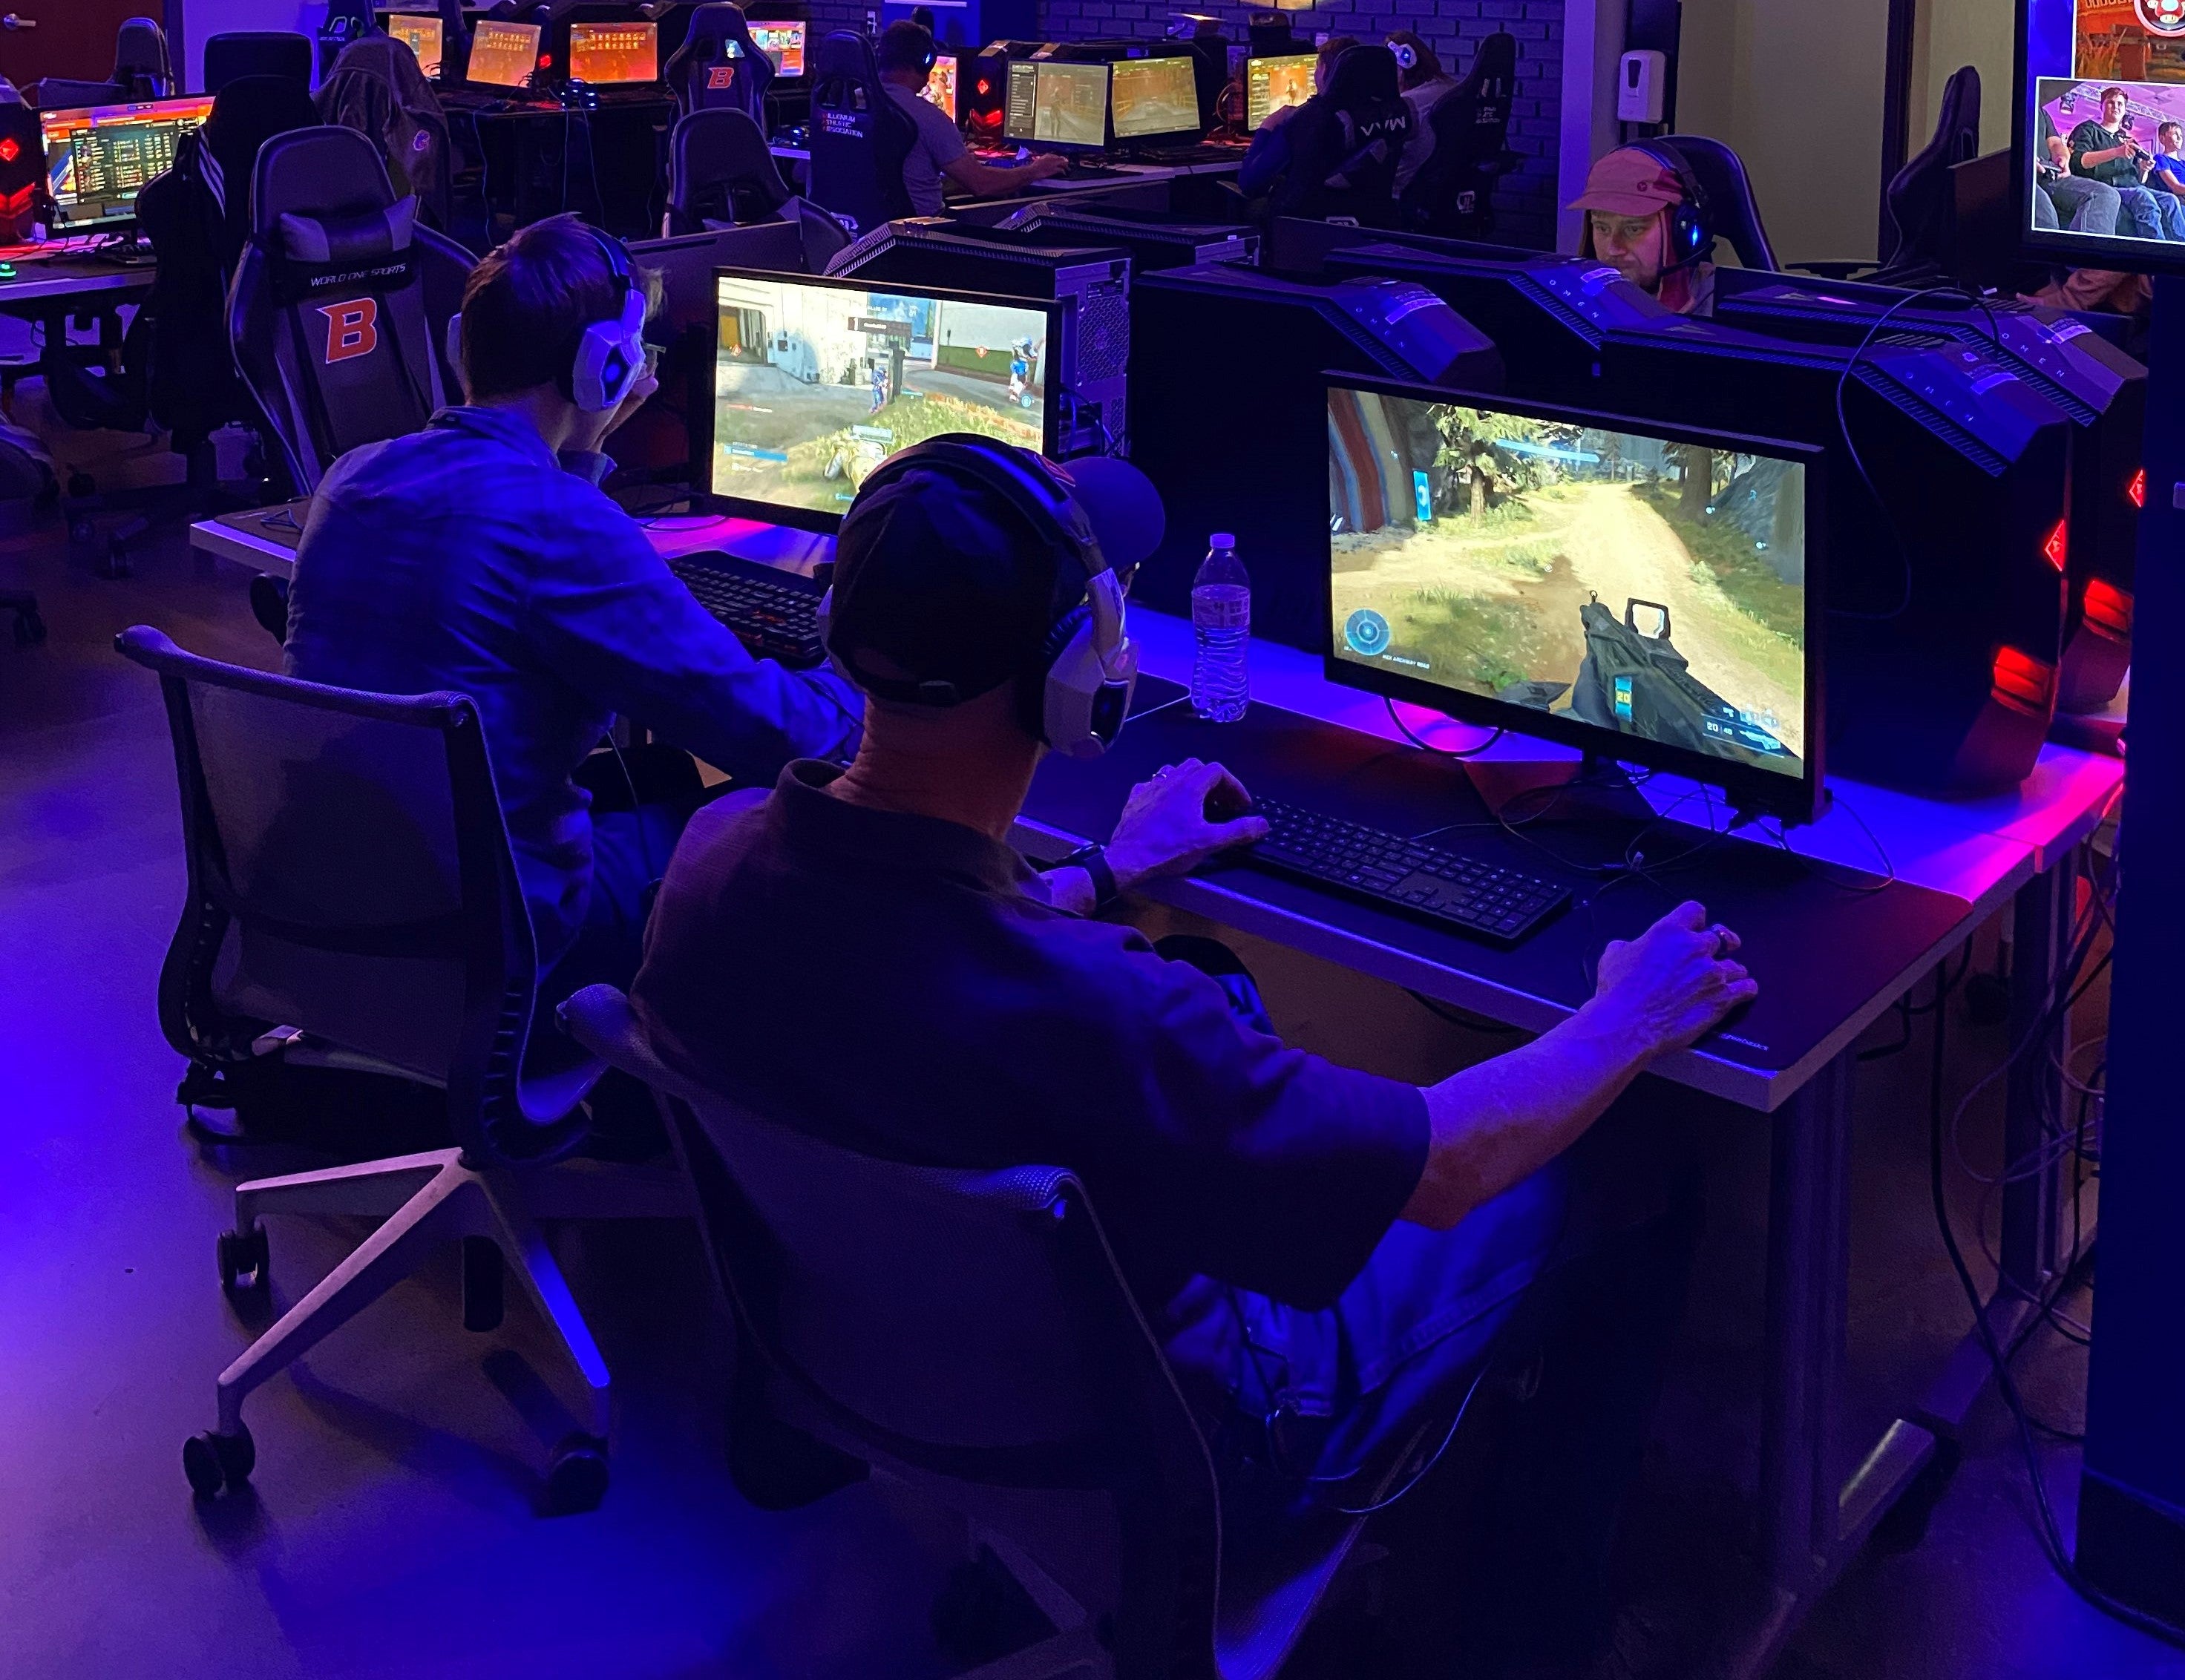 Kount employees competing at Esports